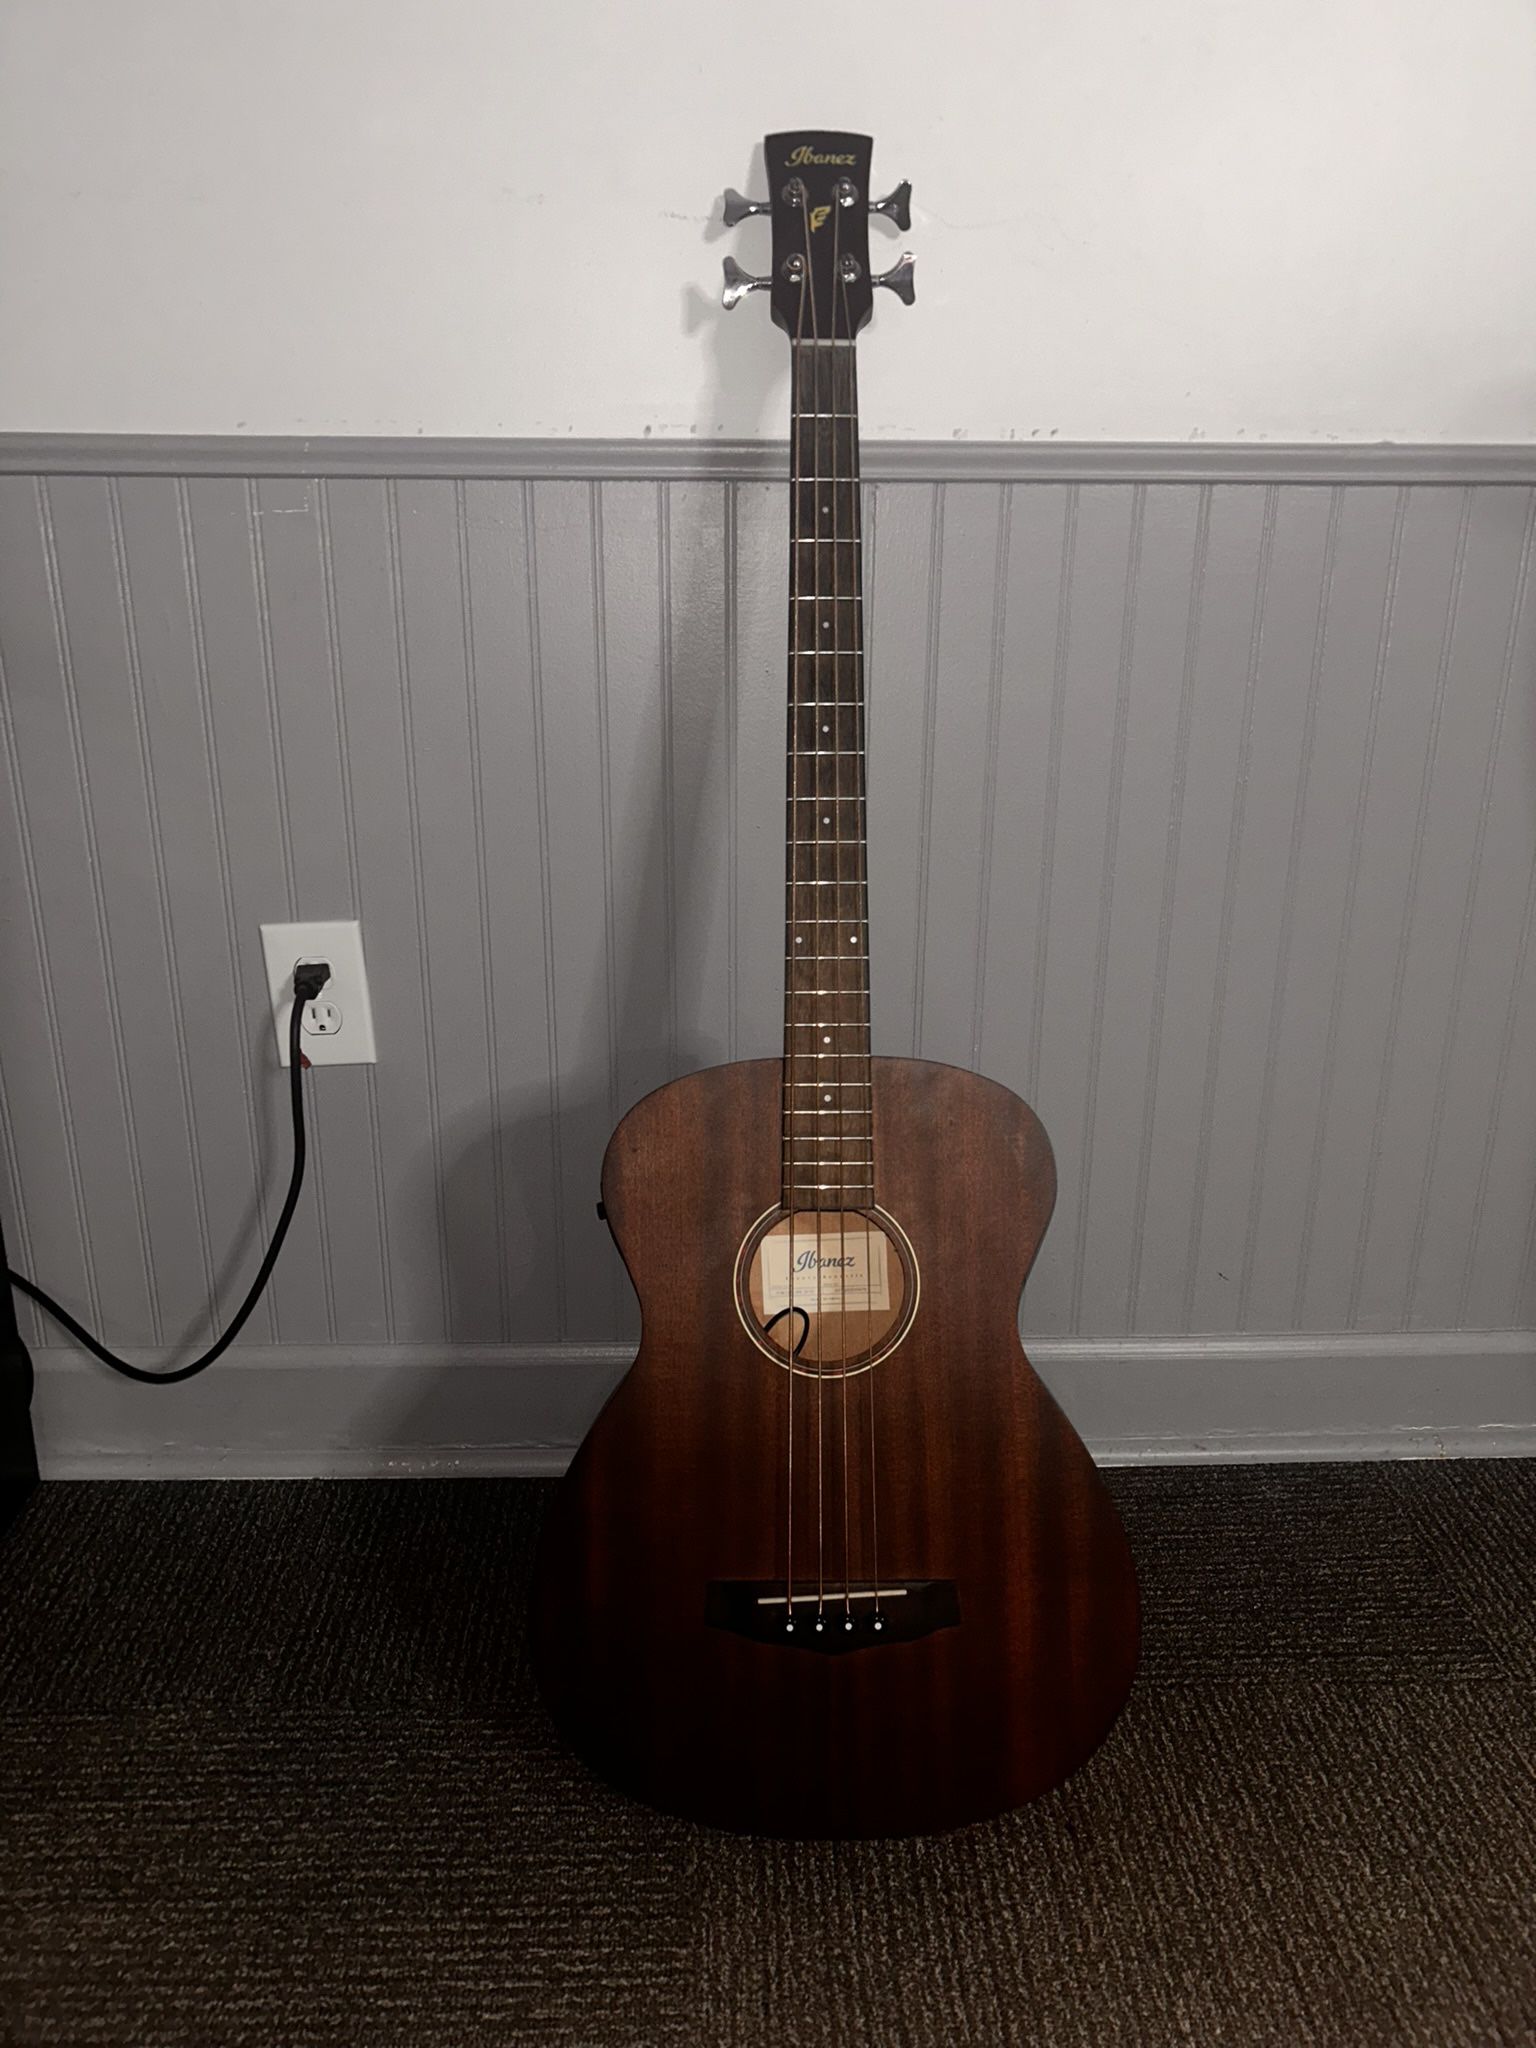 Ibanez Electric / Acoustic Bass